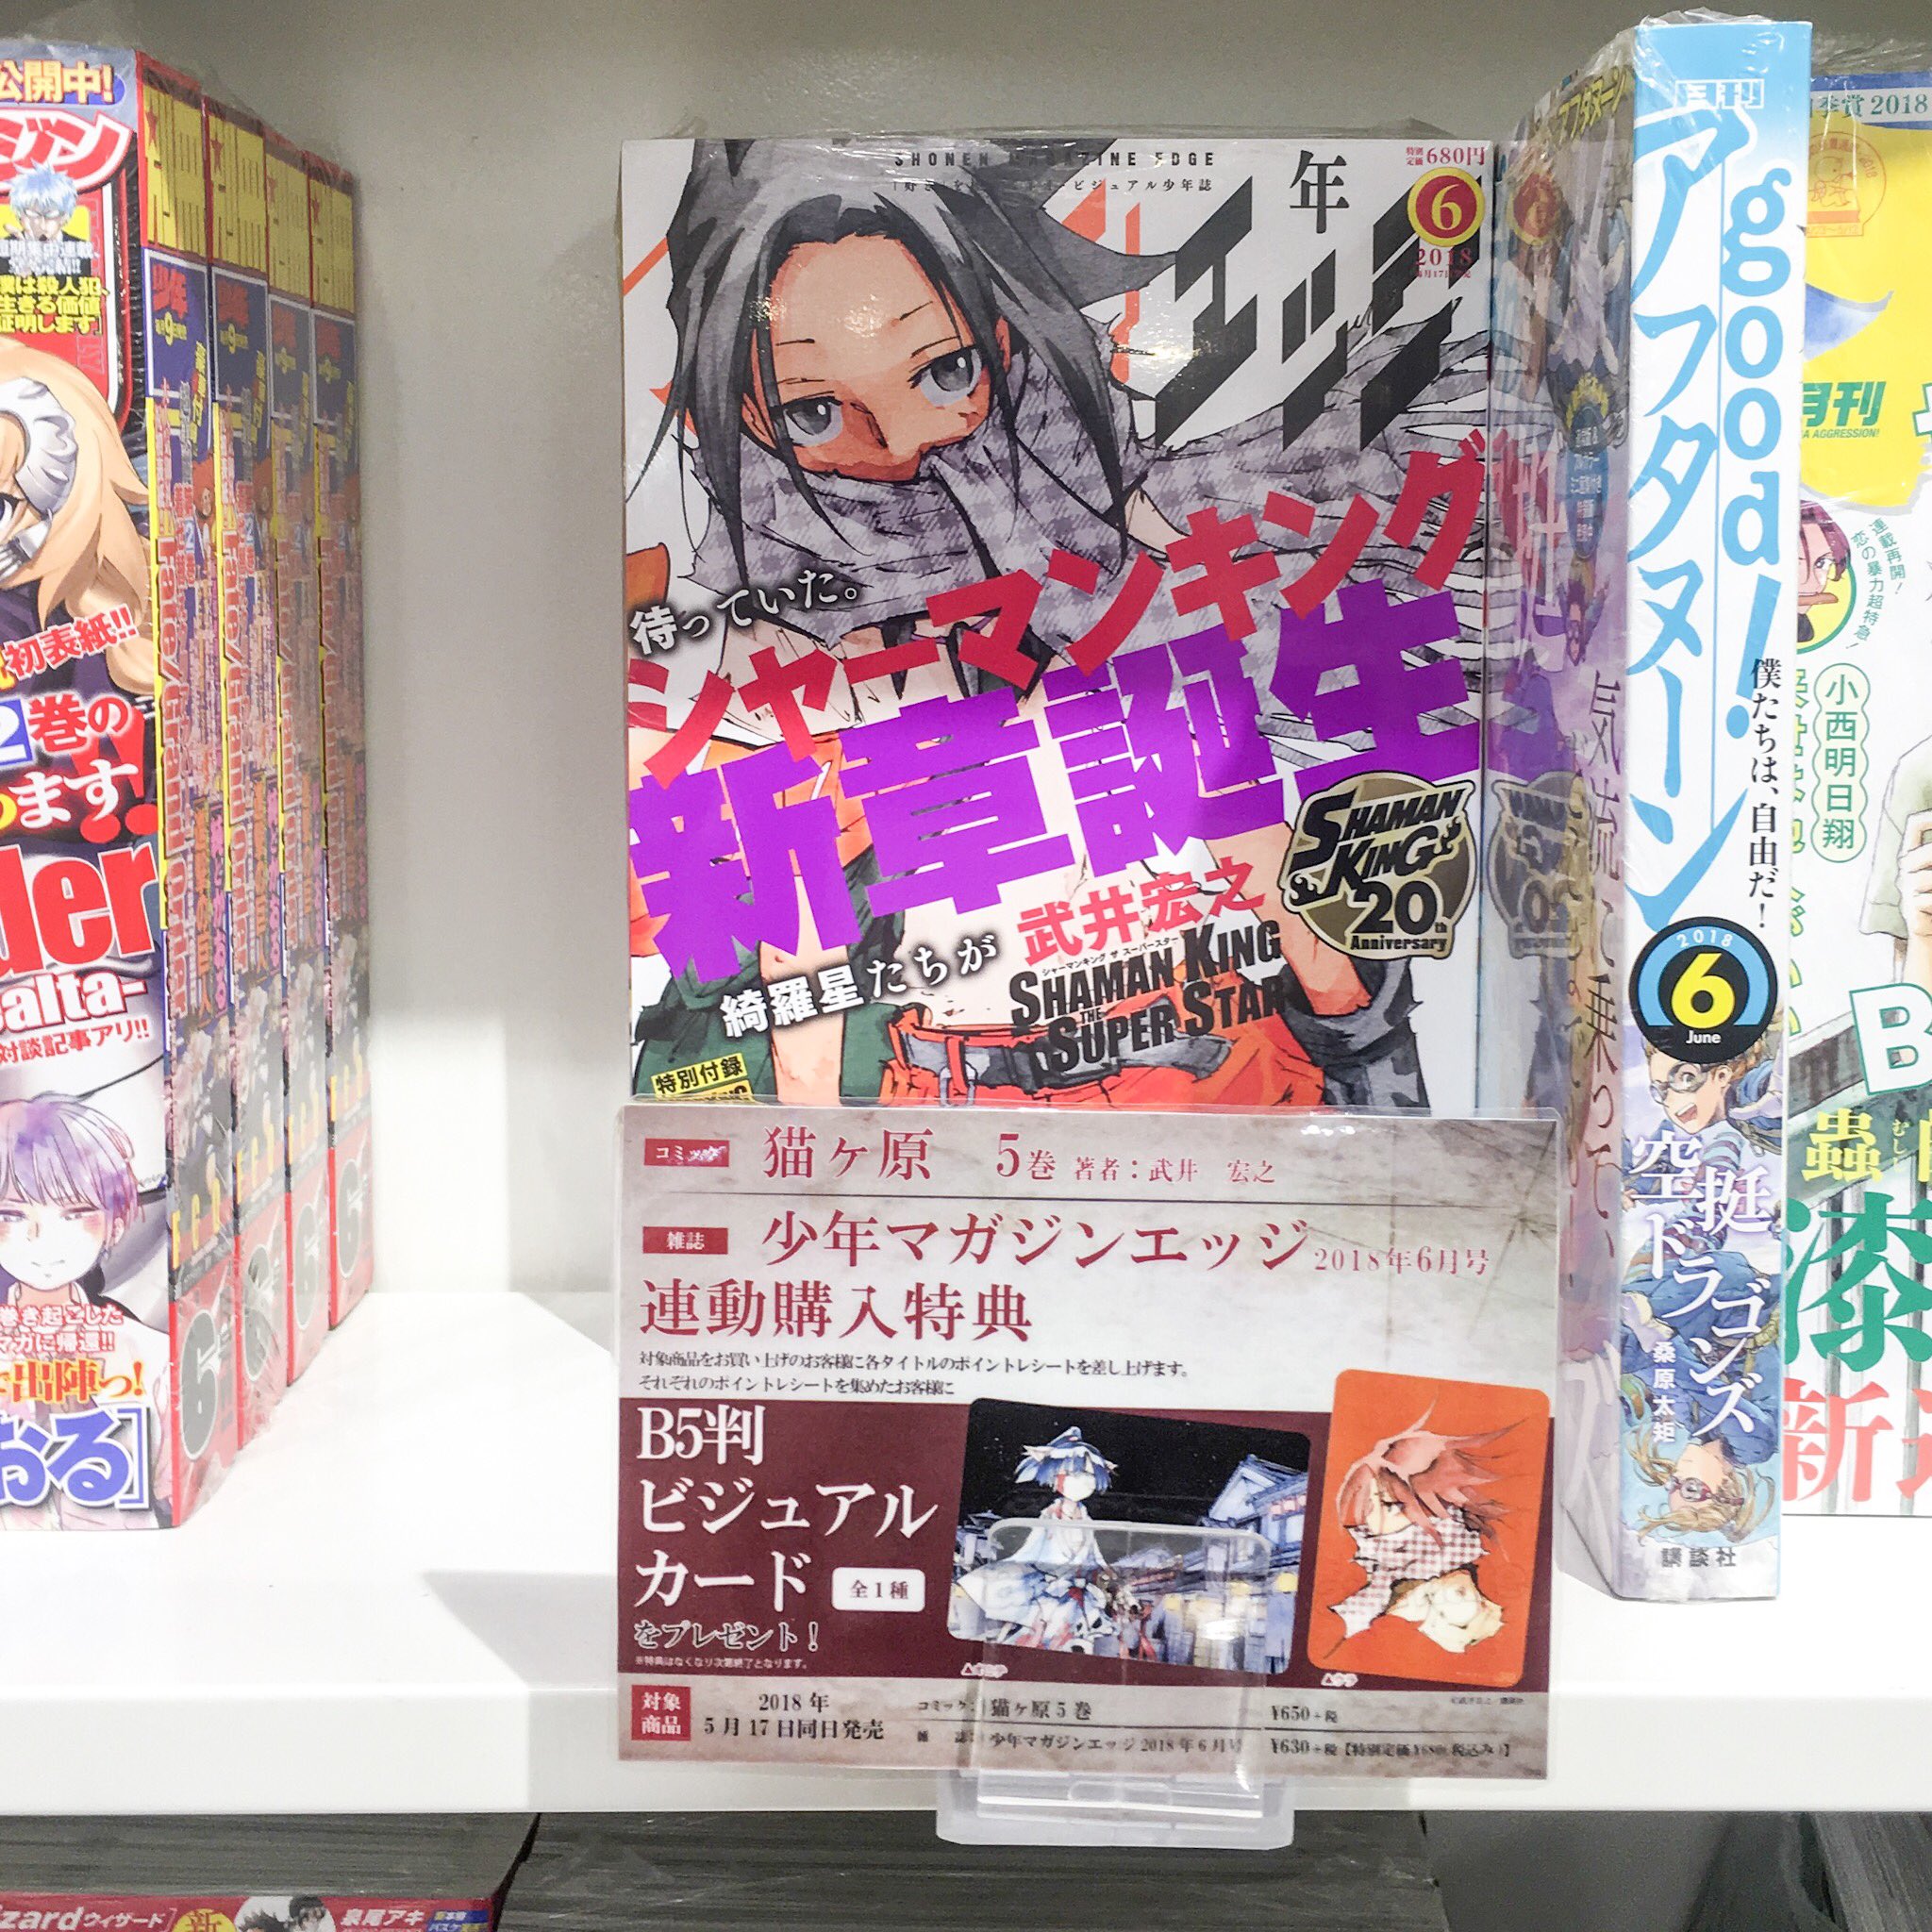 Shaman King Red Crimson Spin Off Manga Titled Patch Cafe